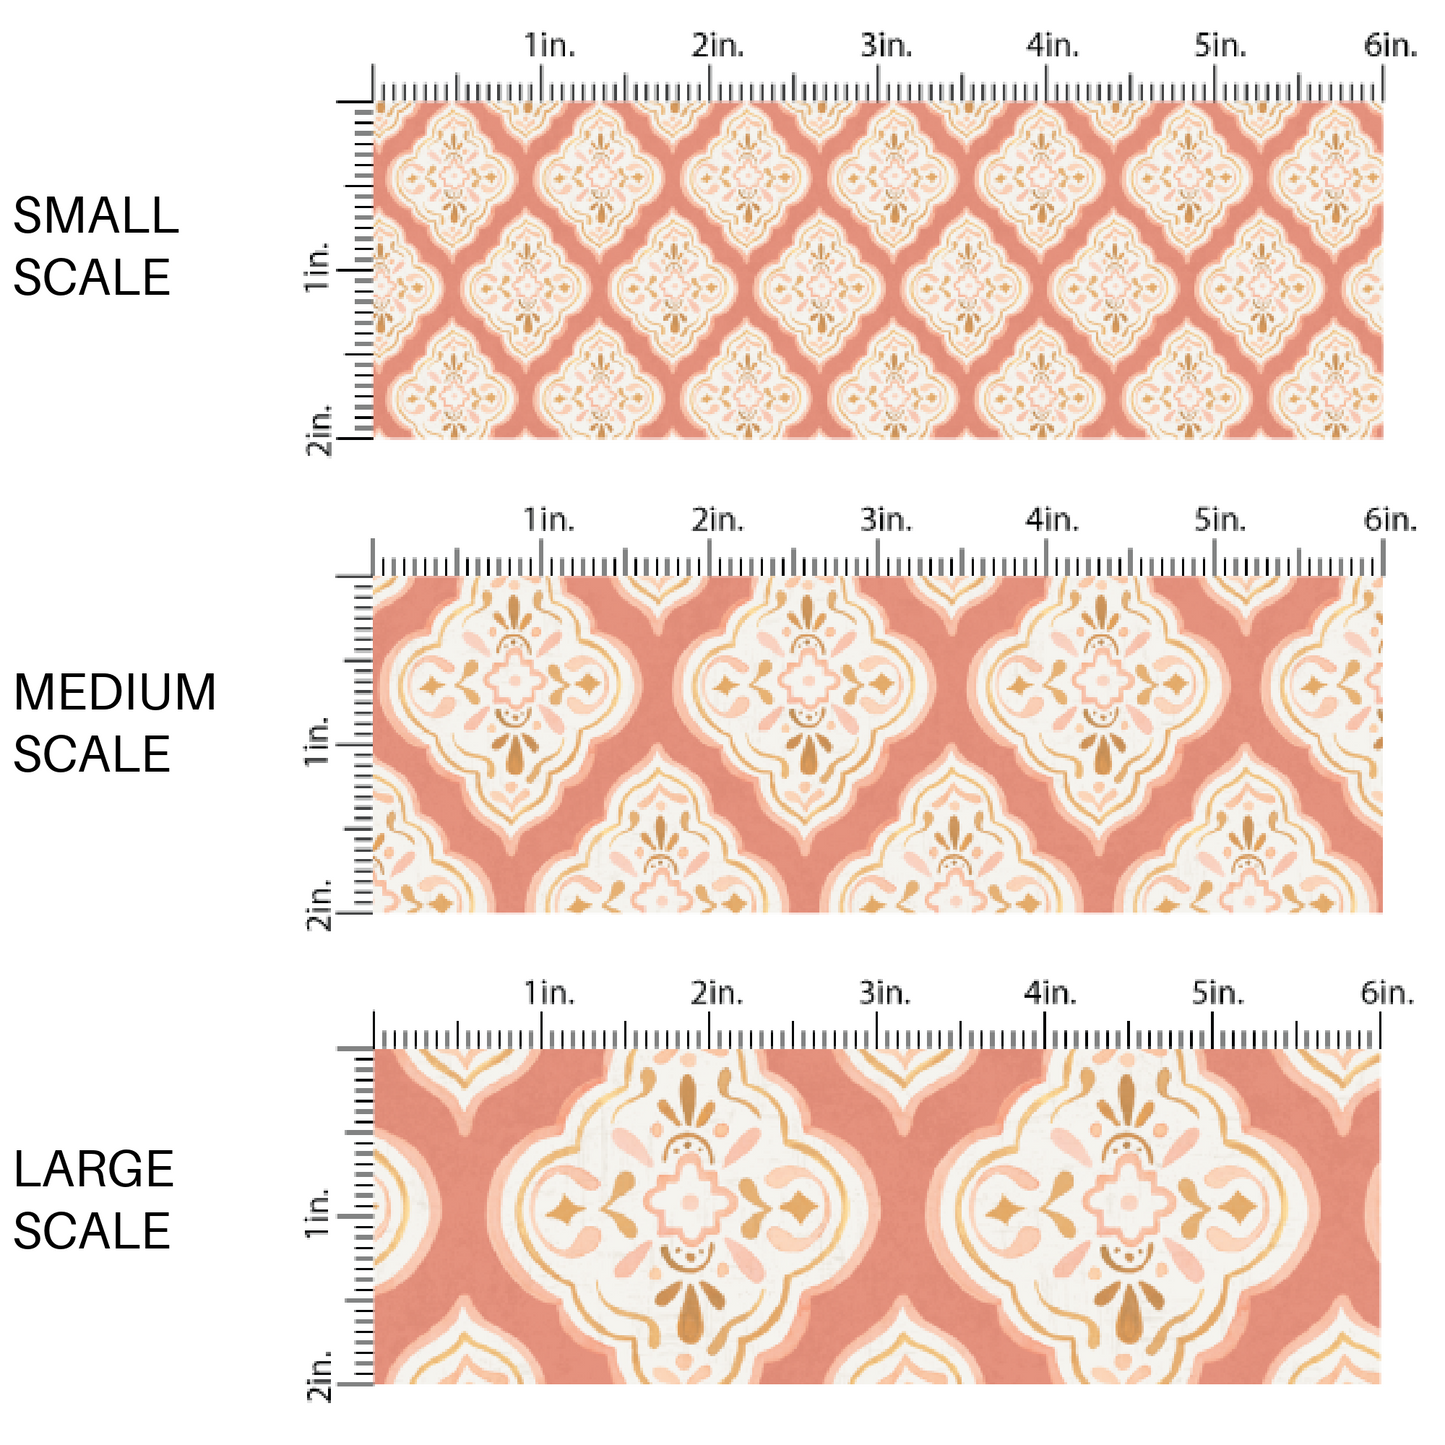 This scale chart of small scale, medium scale, and large scale of these boho pattern themed fabric by the yard features salmon boho medallion pattern. This fun pattern fabric can be used for all your sewing and crafting needs!